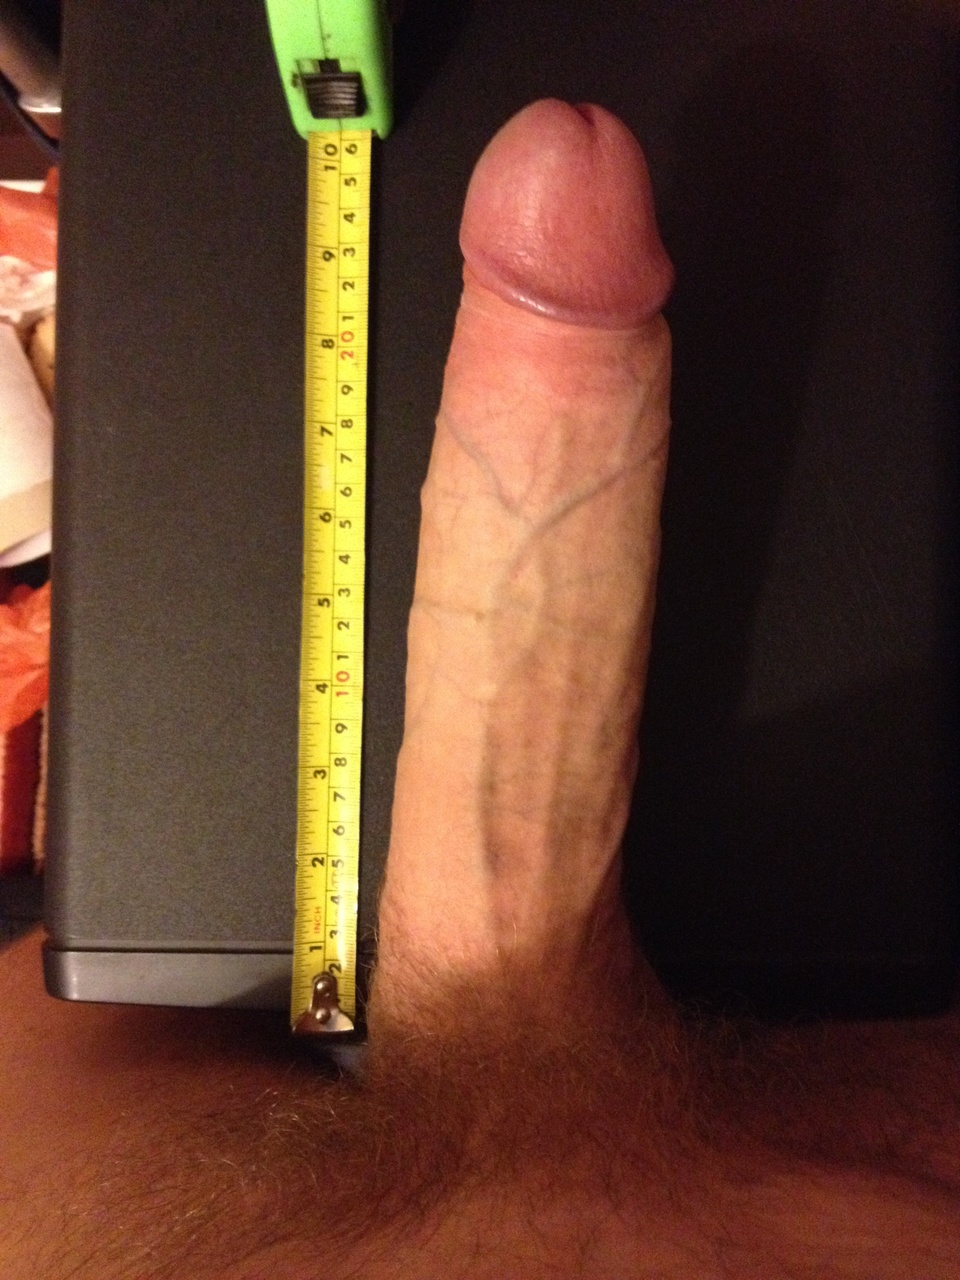 10 inches of pure pleasure: See the hottest 10 inch cock pictures here!